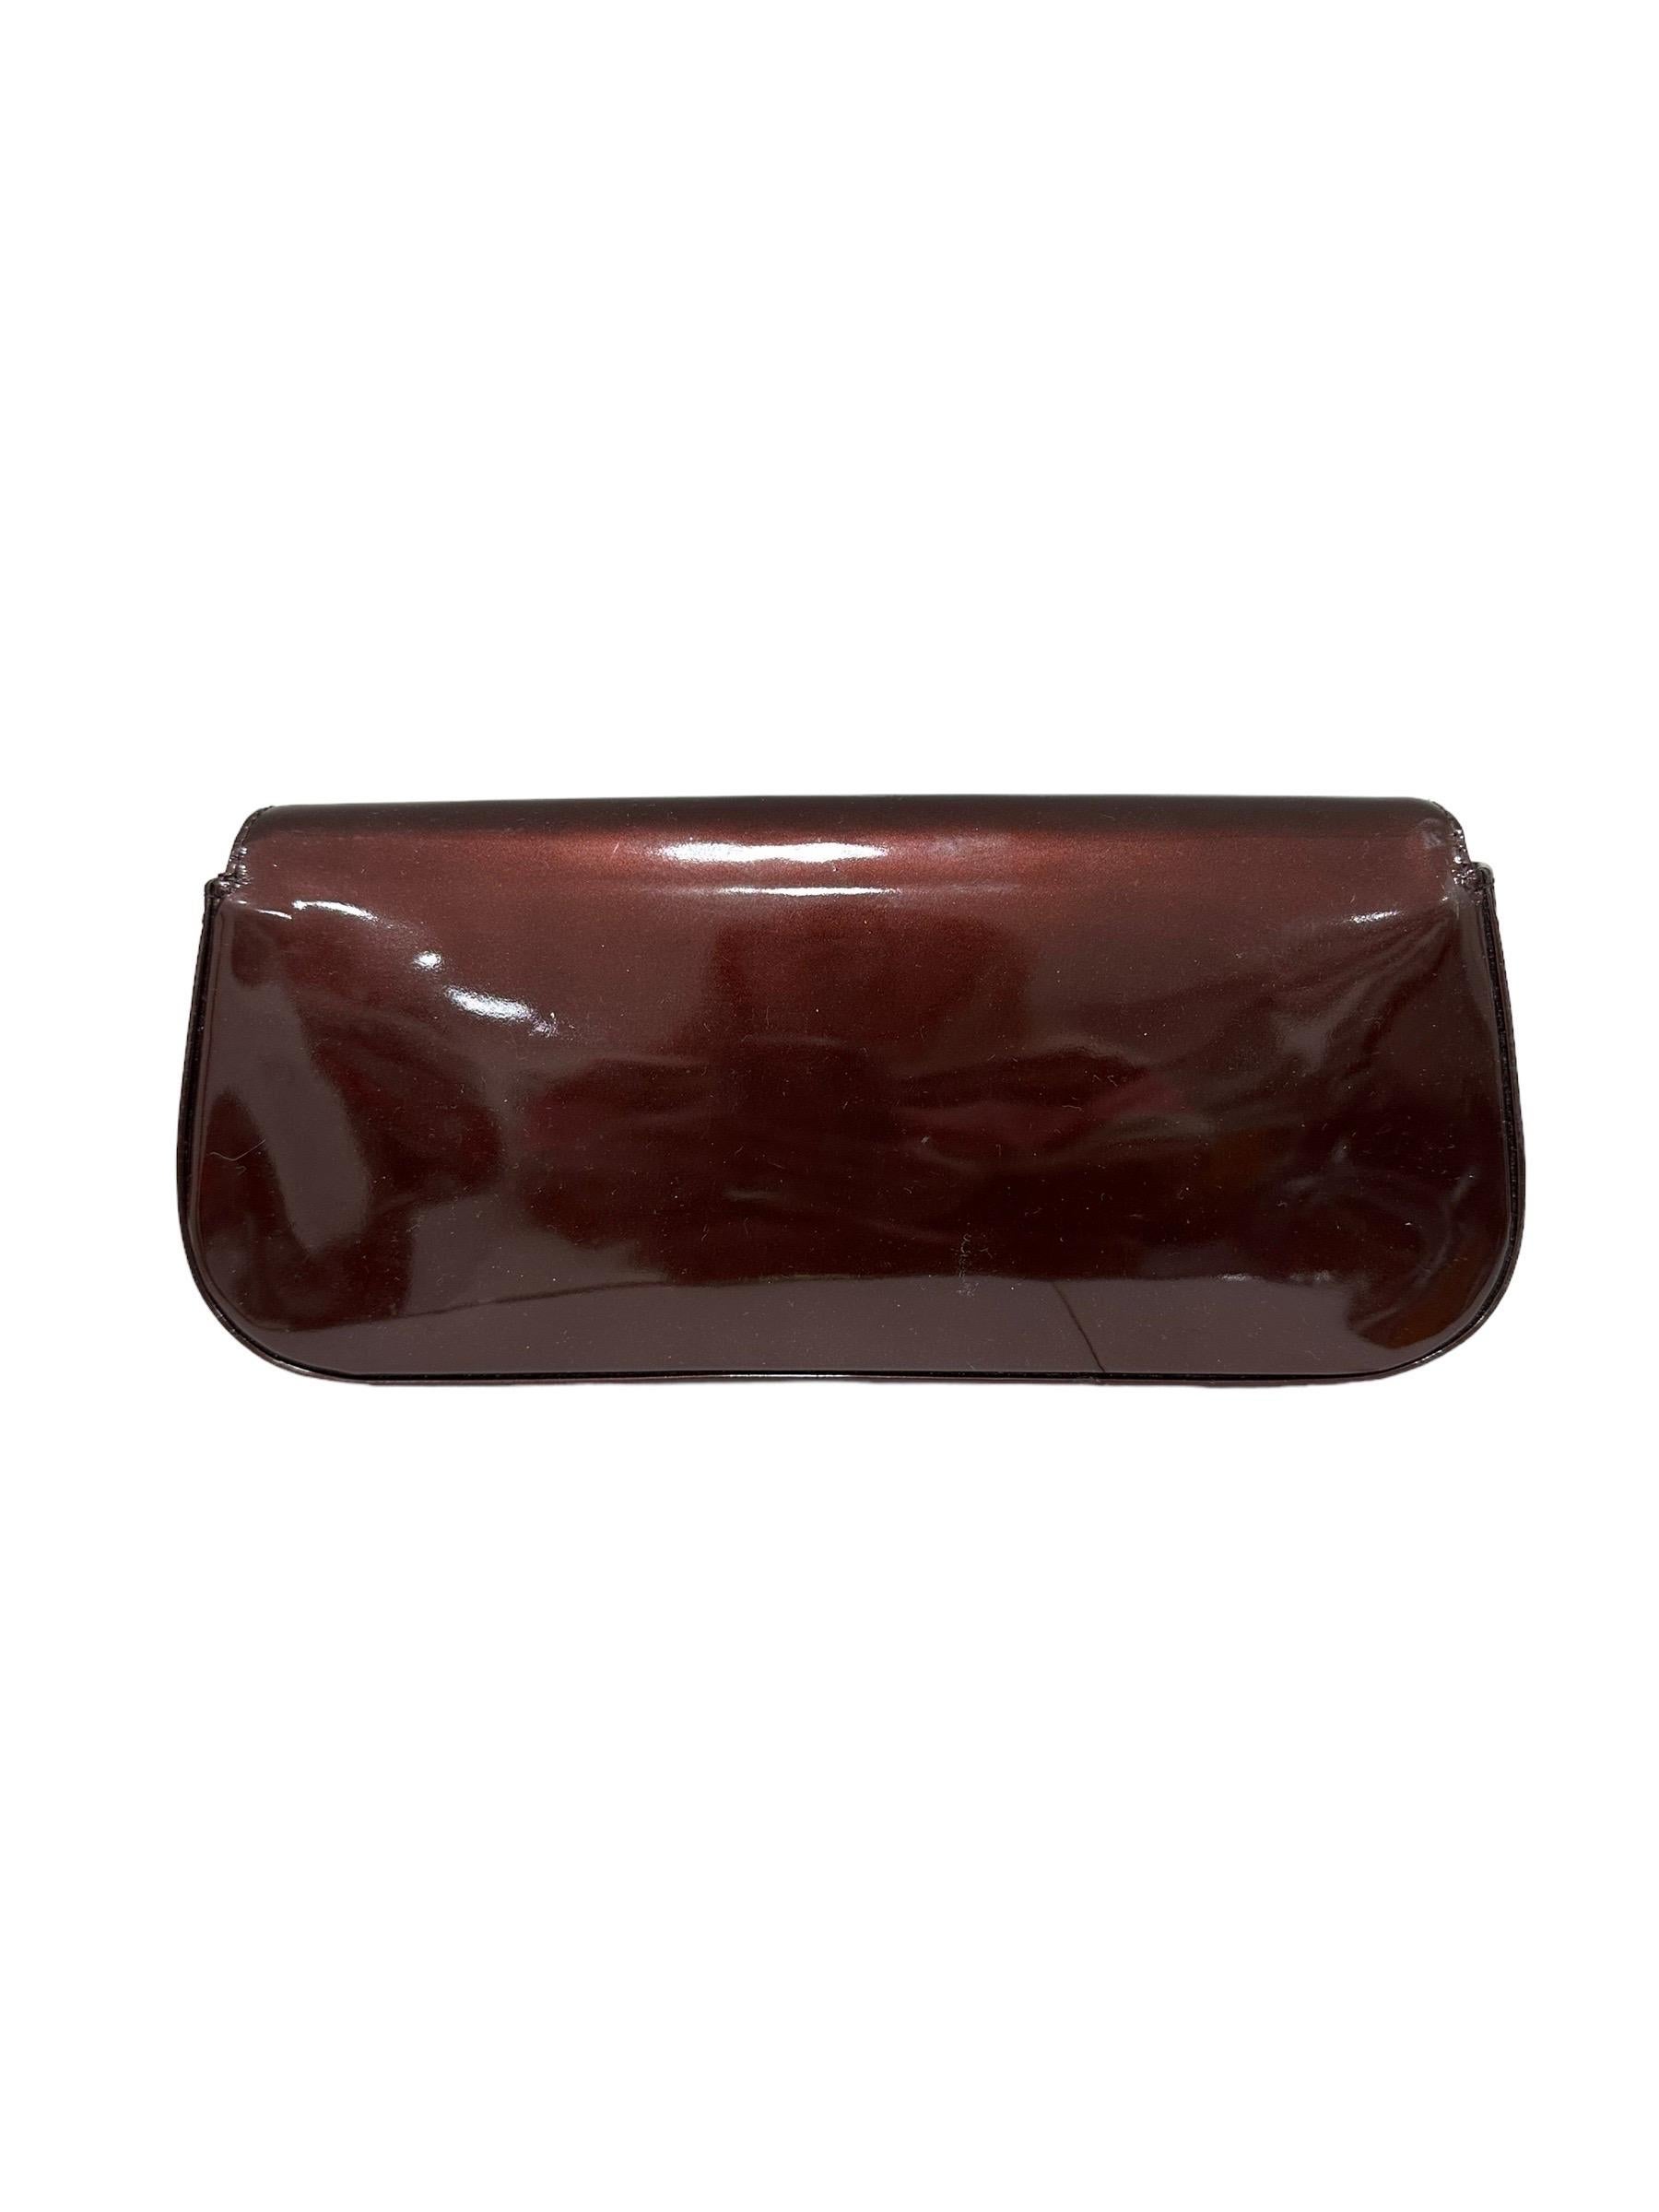 Louis Vuitton Sobe Clutch Bordeaux Patent Leather In Good Condition For Sale In Torre Del Greco, IT